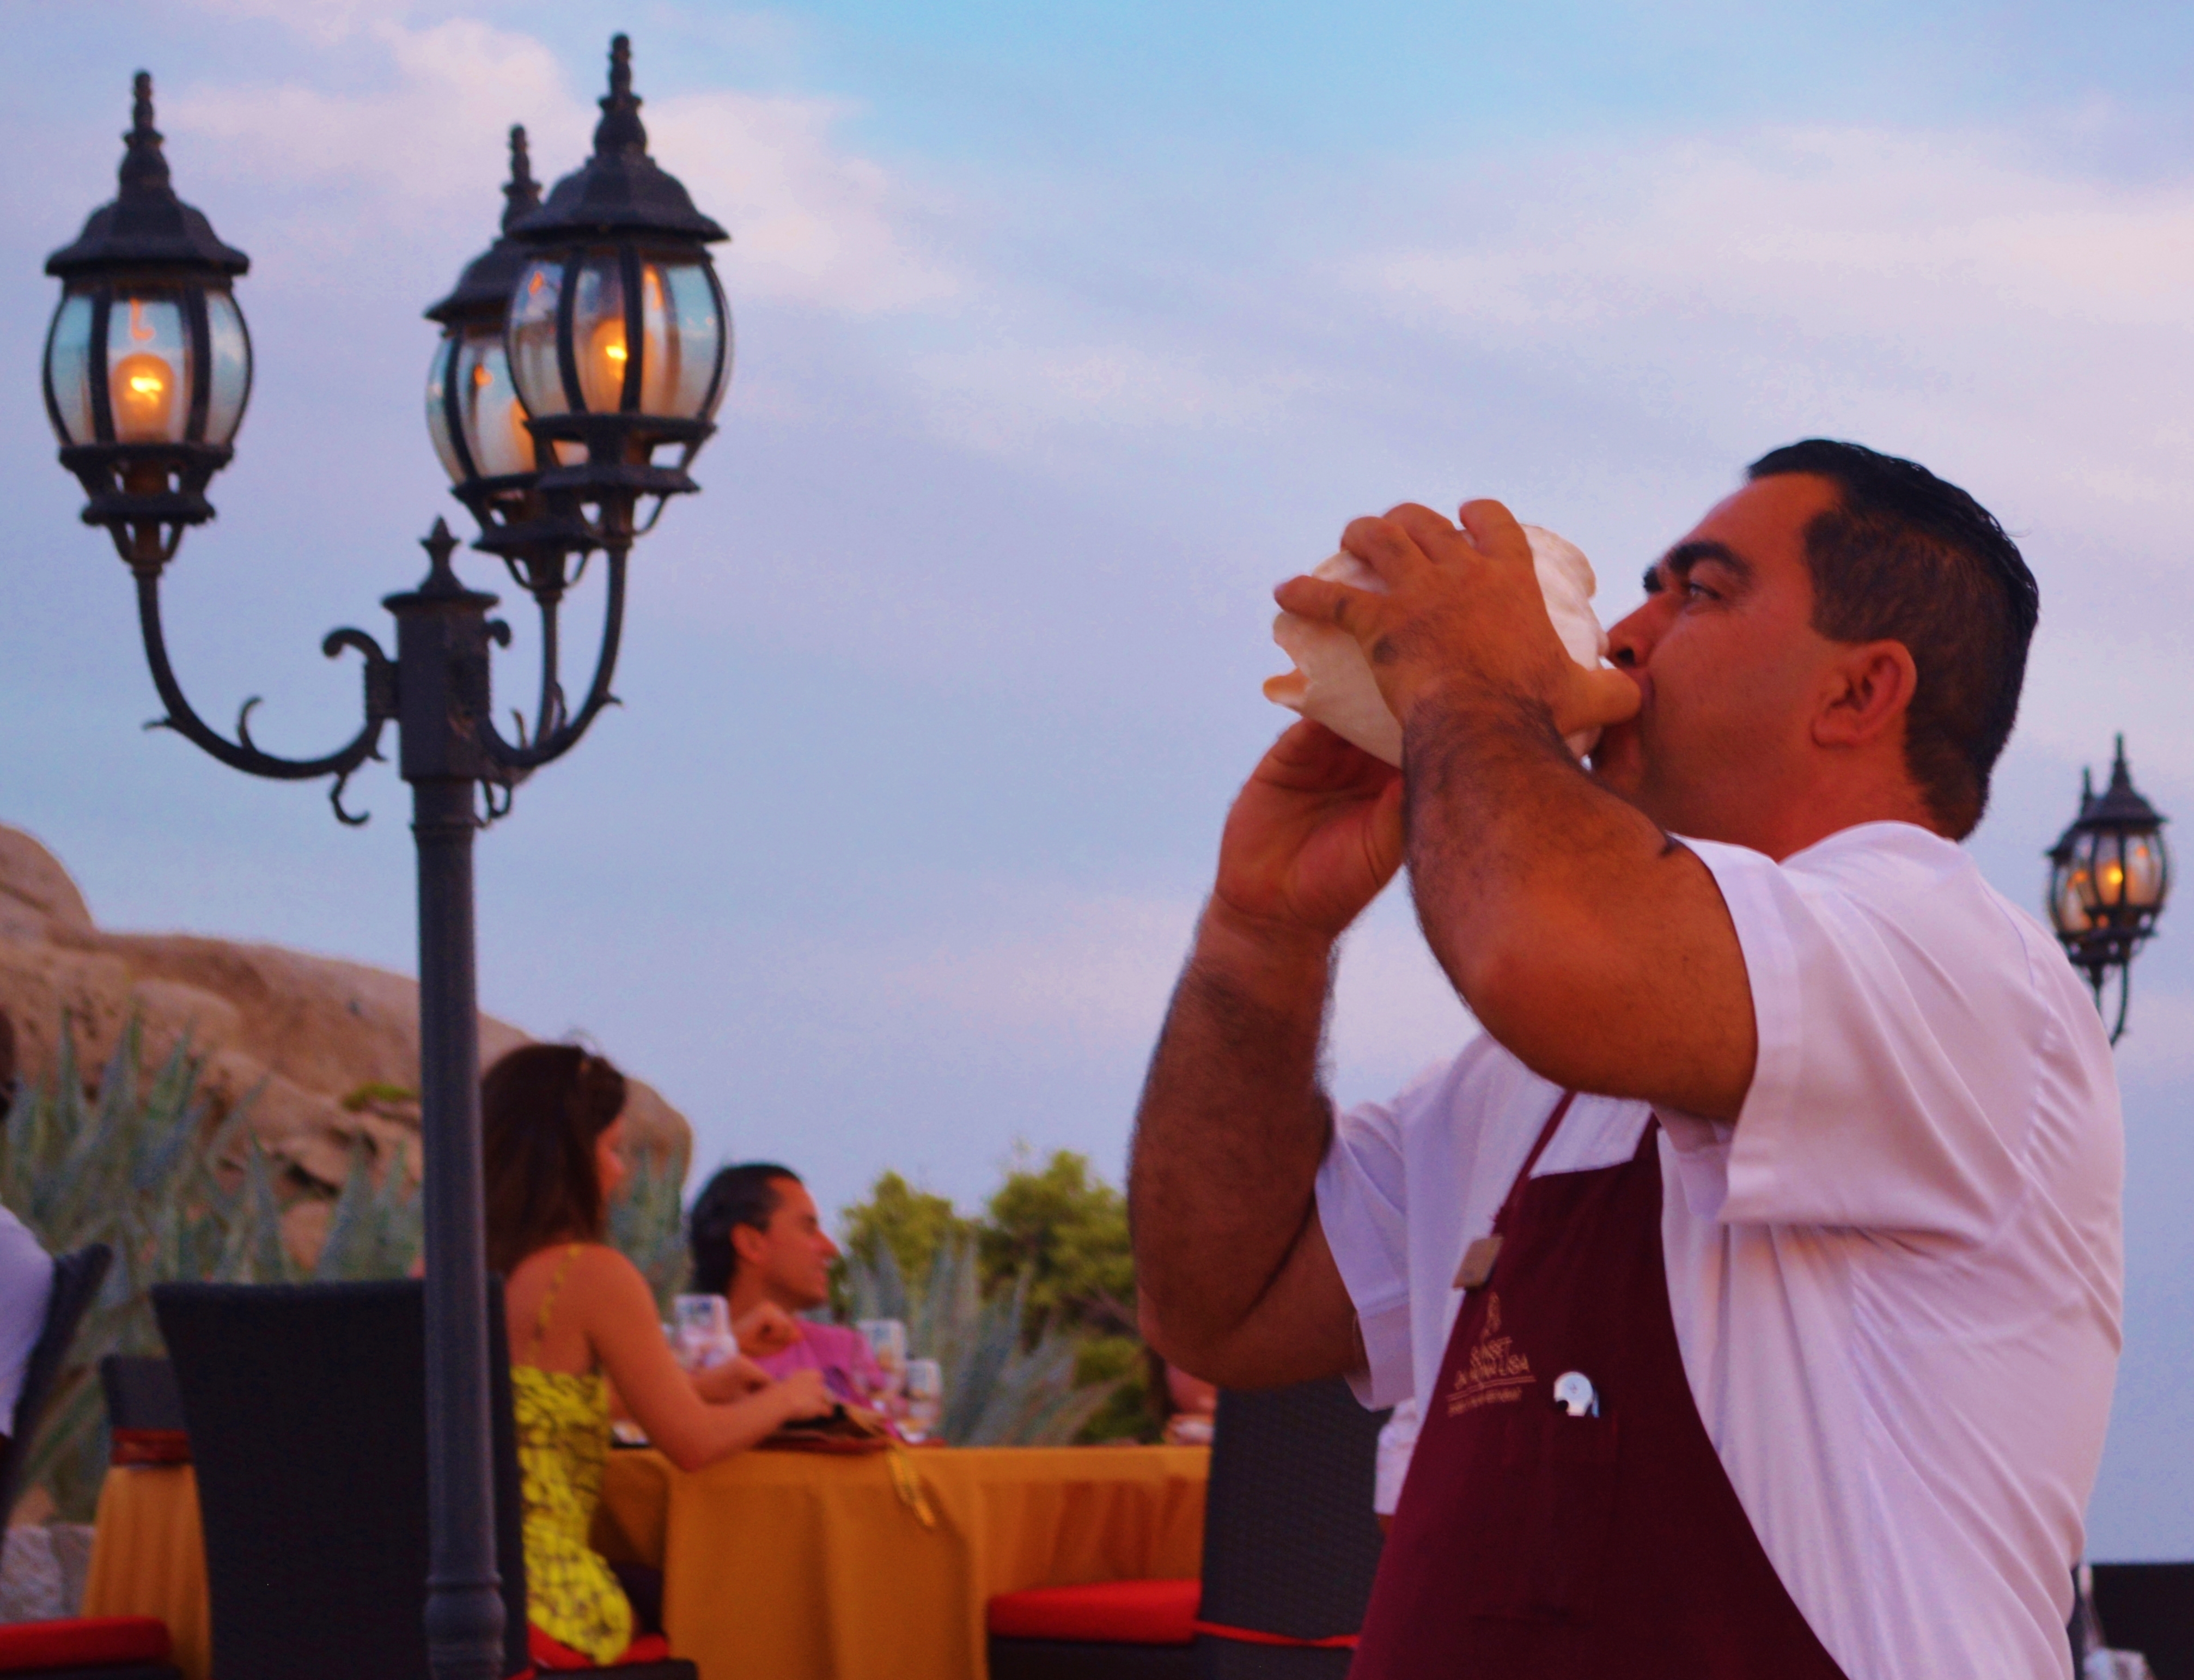 Summons to Sunset - Restaurants in Cabo San Lucas